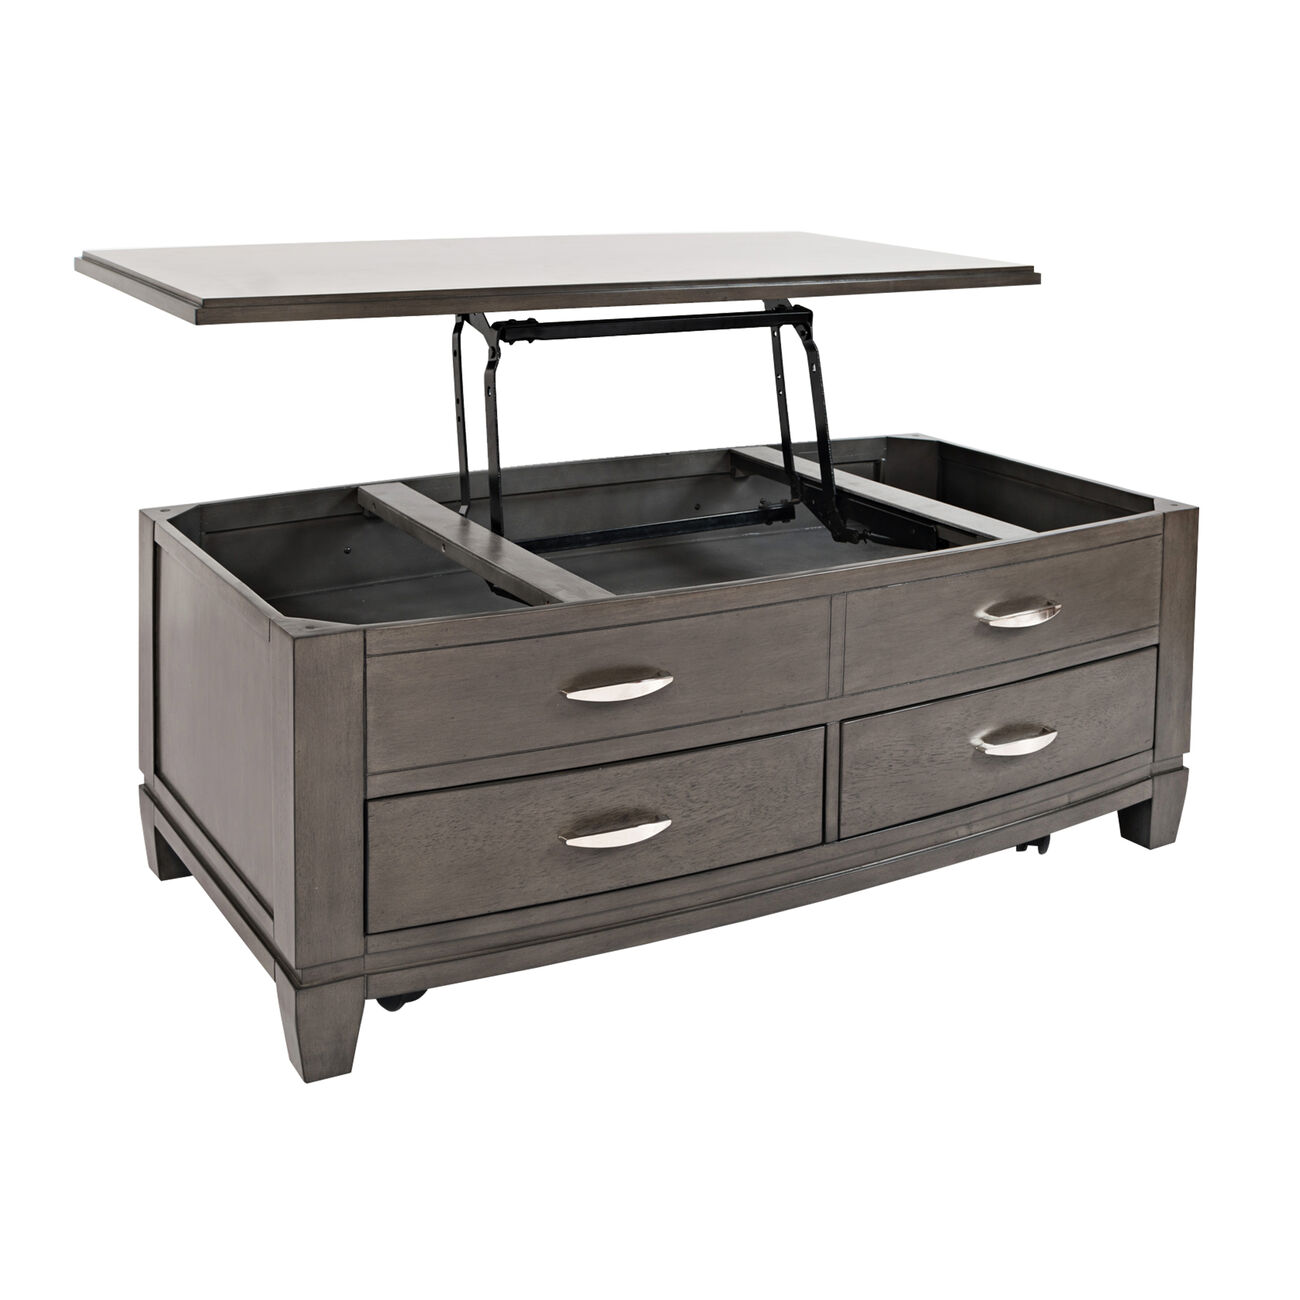 Wooden Lift Top Cocktail Table with 4 Drawer Storage and Caster Wheels,Gray